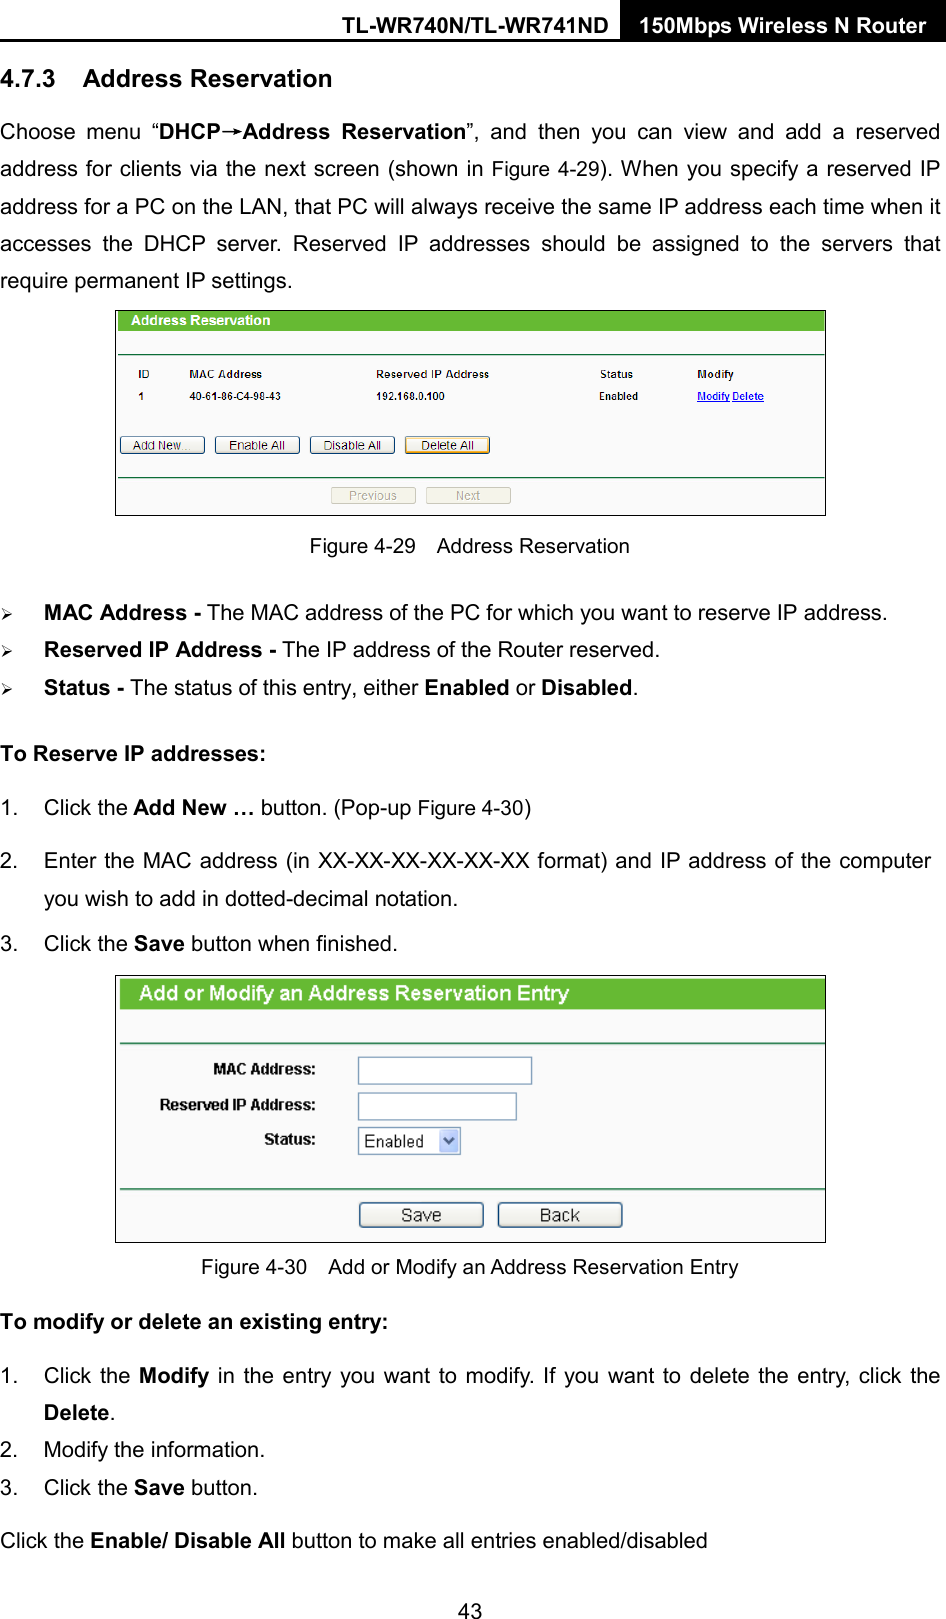 TL-WR740N/TL-WR741ND 150Mbps Wireless N Router  4.7.3 Address Reservation Choose menu “DHCP→Address Reservation”,  and then you can view and add a reserved address for clients via the next screen (shown in Figure 4-29). When you specify a reserved IP address for a PC on the LAN, that PC will always receive the same IP address each time when it accesses the DHCP server. Reserved IP addresses should be assigned to the  servers  that require permanent IP settings.    Figure 4-29  Address Reservation  MAC Address - The MAC address of the PC for which you want to reserve IP address.  Reserved IP Address - The IP address of the Router reserved.  Status - The status of this entry, either Enabled or Disabled. To Reserve IP addresses:   1. Click the Add New … button. (Pop-up Figure 4-30) 2. Enter the MAC address (in XX-XX-XX-XX-XX-XX format) and IP address of the computer you wish to add in dotted-decimal notation.   3. Click the Save button when finished.    Figure 4-30  Add or Modify an Address Reservation Entry To modify or delete an existing entry: 1. Click the Modify  in the entry you want to modify. If you want to delete the entry, click the Delete. 2. Modify the information.   3. Click the Save button. Click the Enable/ Disable All button to make all entries enabled/disabled 43 